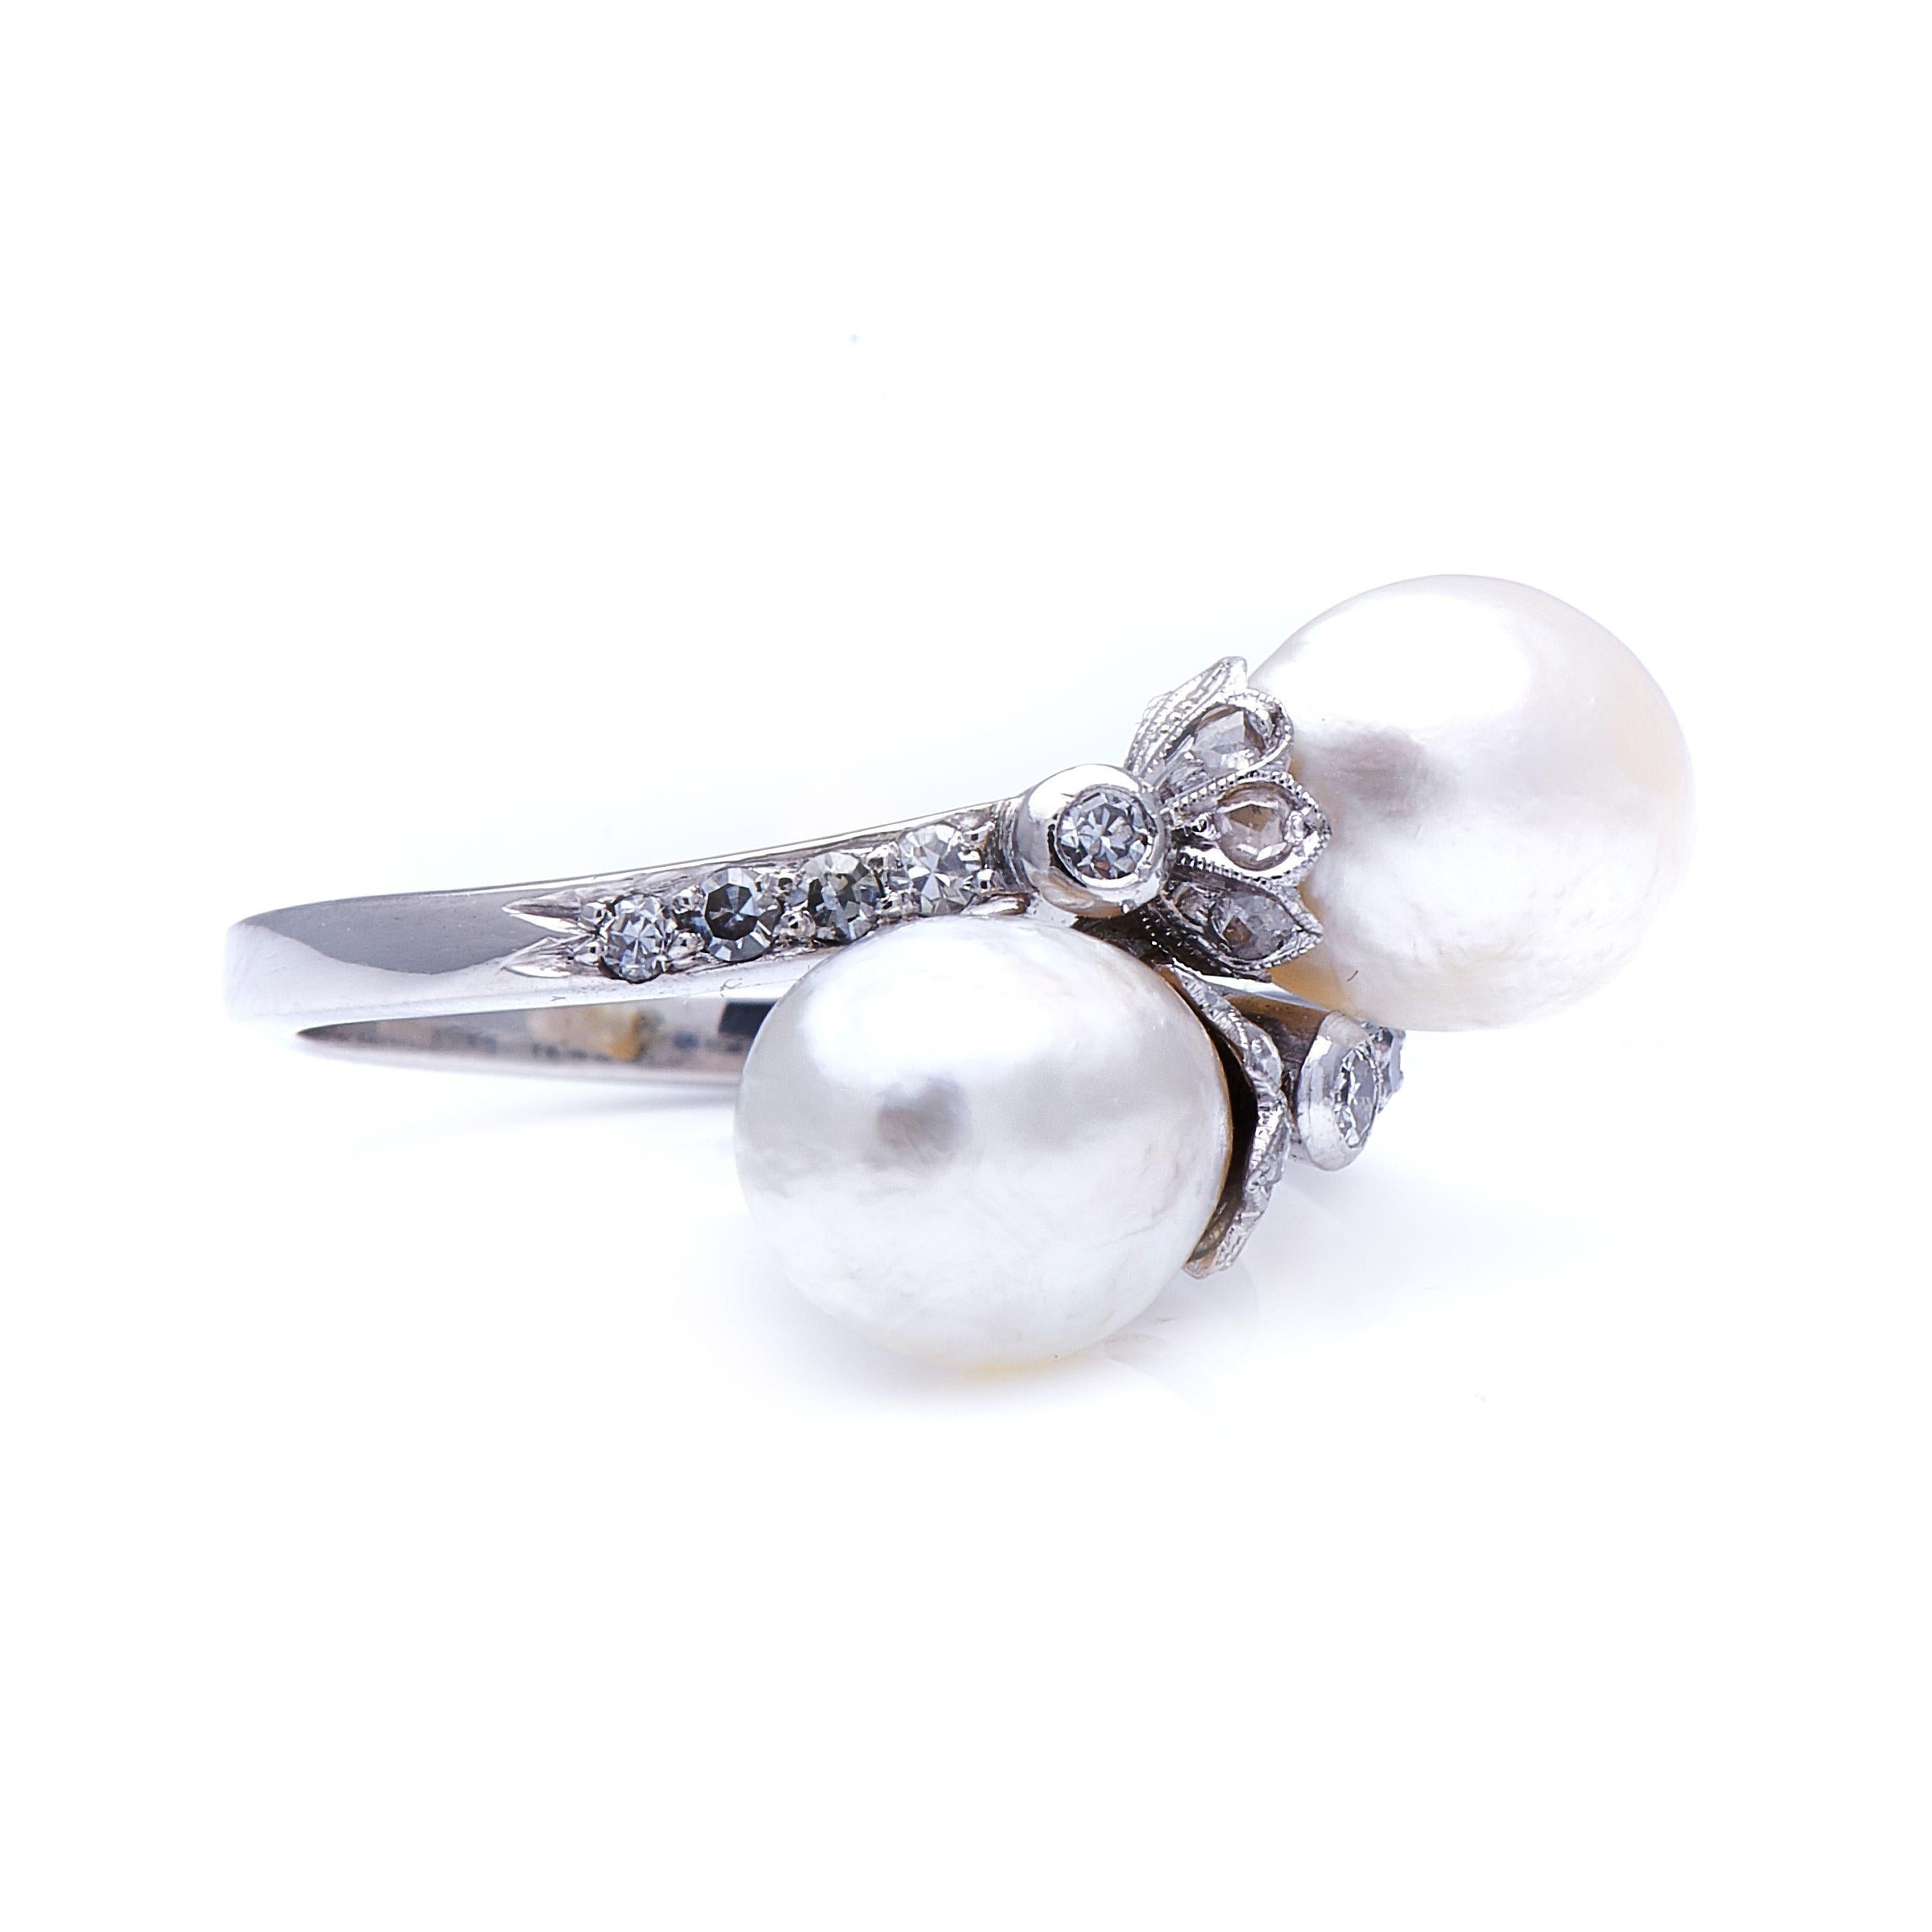 Natural pearl and diamond ring, circa 1910. Natural pearls are very rare, and finding each one is down to pure luck. Finding one of good lustre, of substantial size and regular shape is even rarer, and finding a pair can take years of searching. The